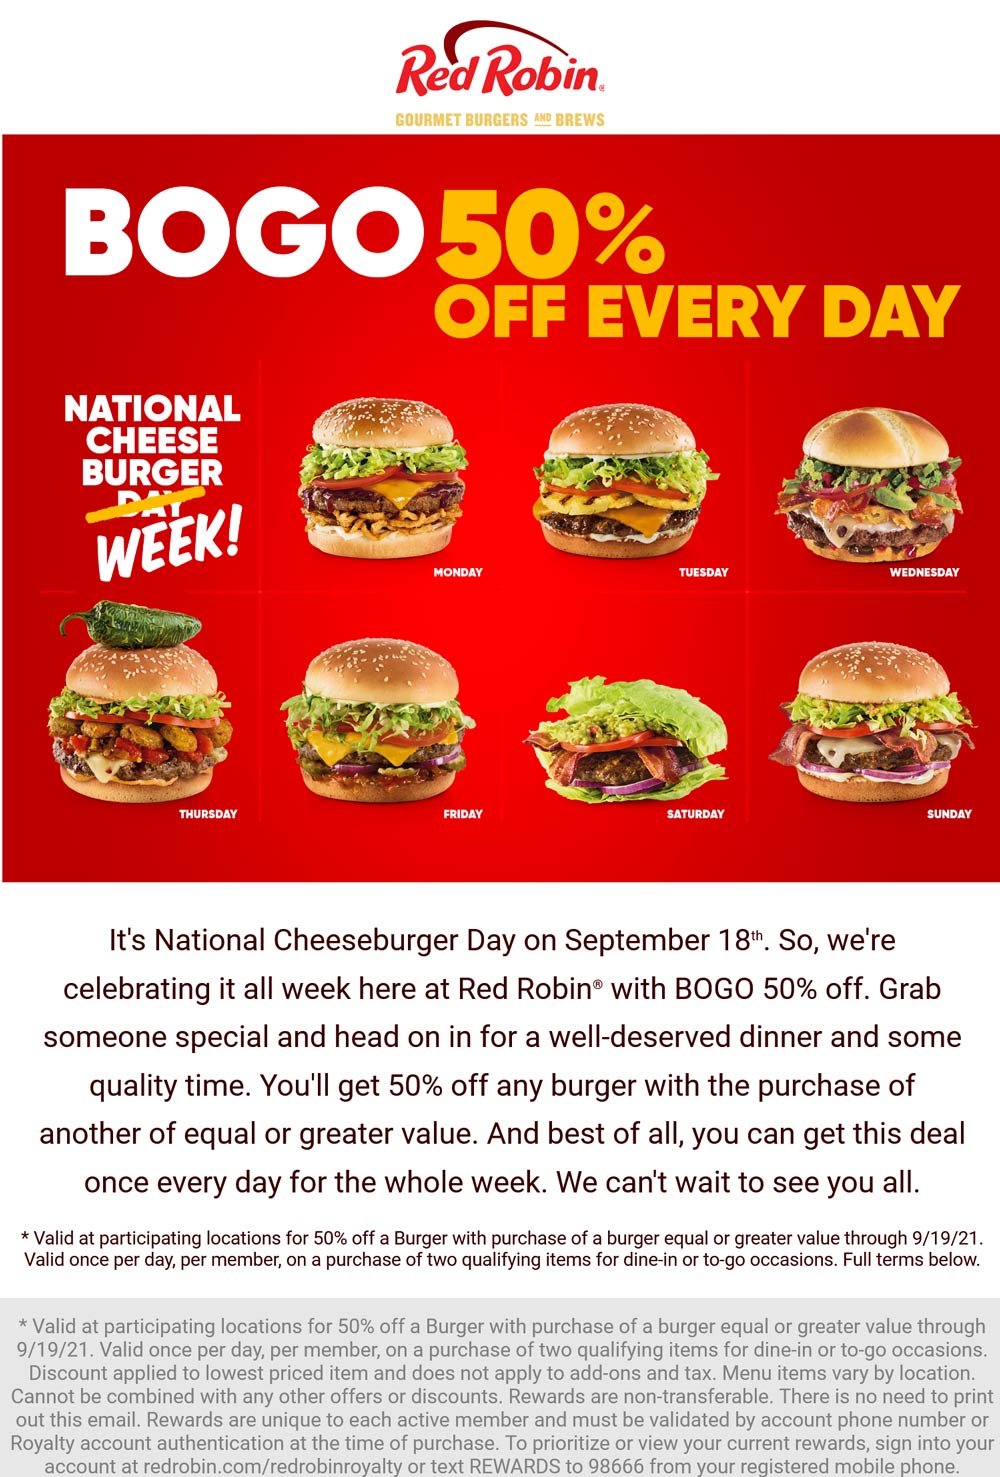 Red Robin restaurants Coupon  Second cheeseburger 50% off at Red Robin #redrobin 